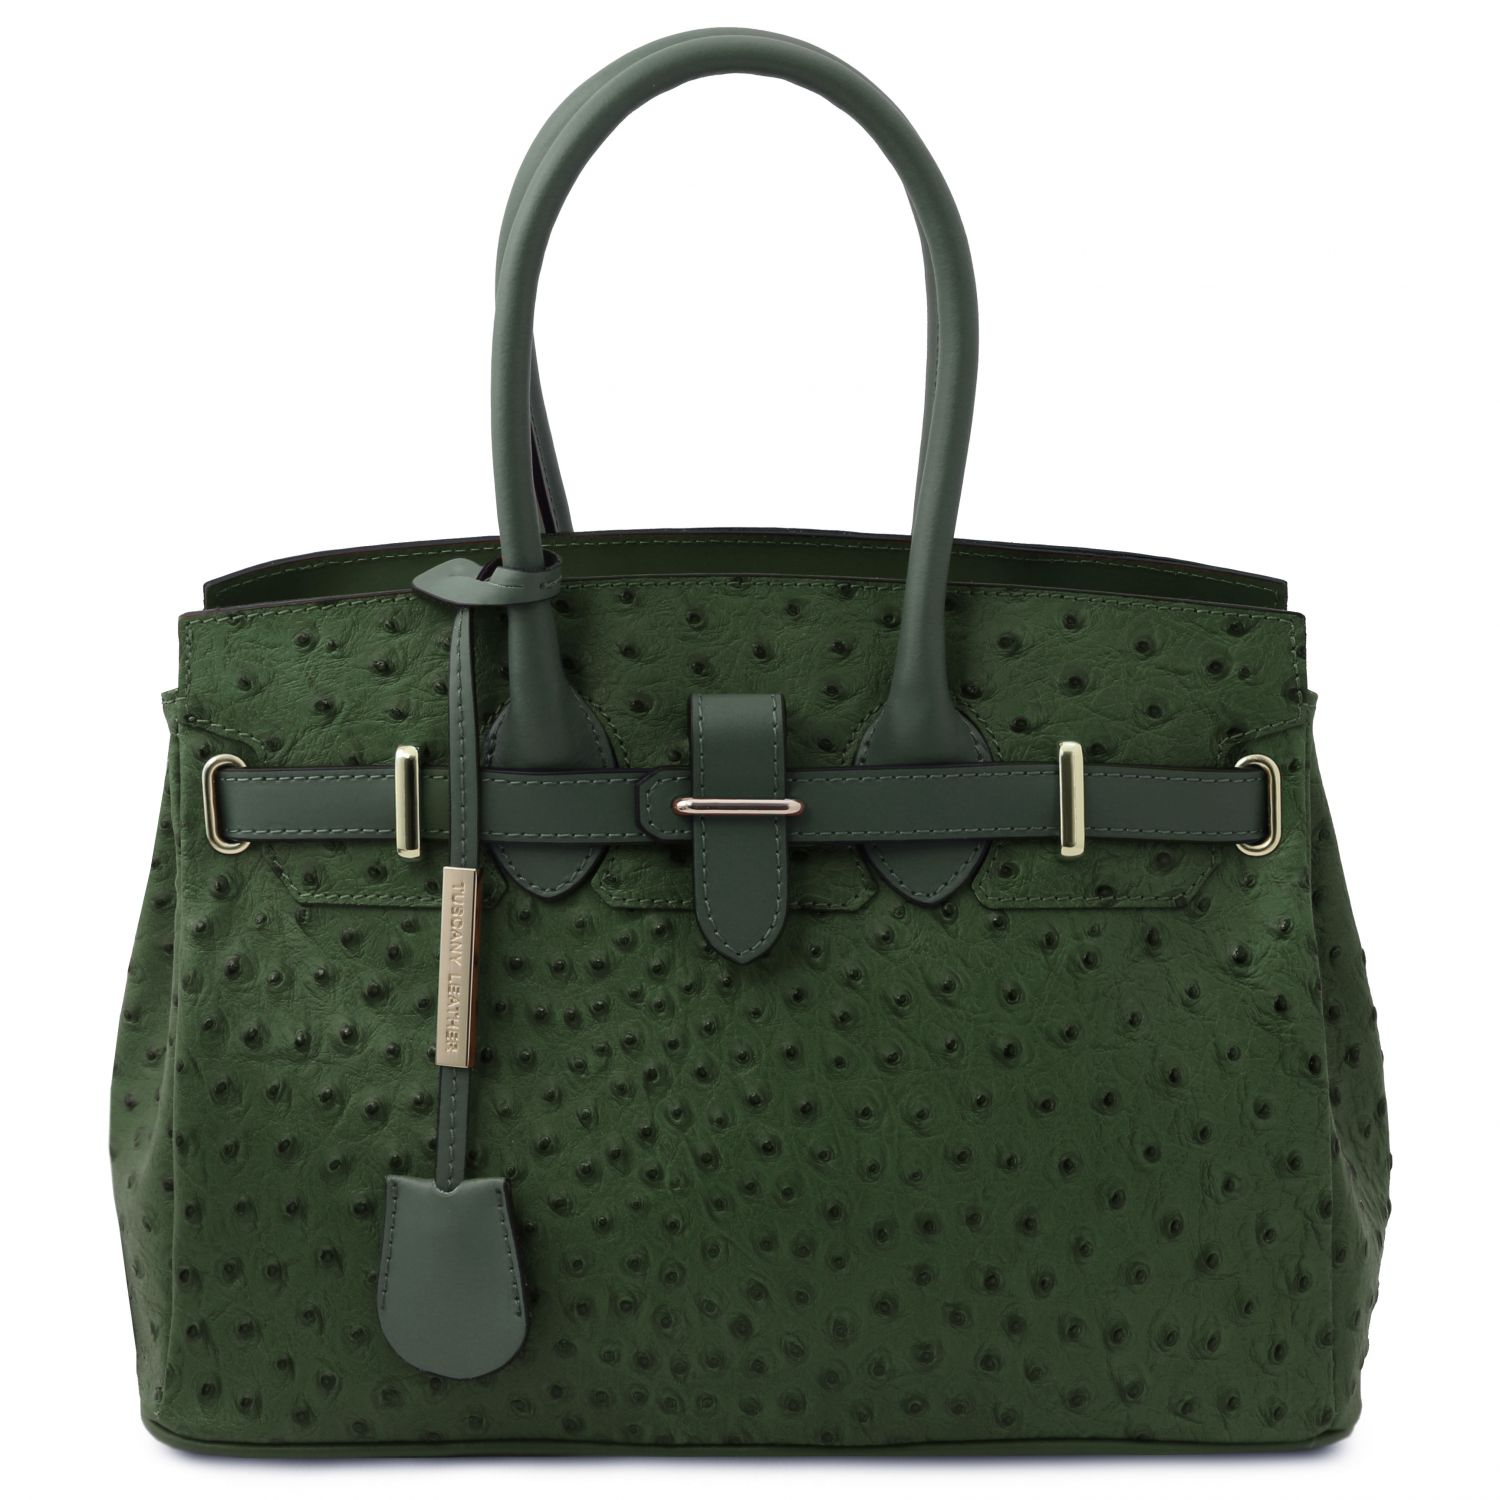 Tuscany Leather TL Bag Handbag in Ostrich-Print Leather